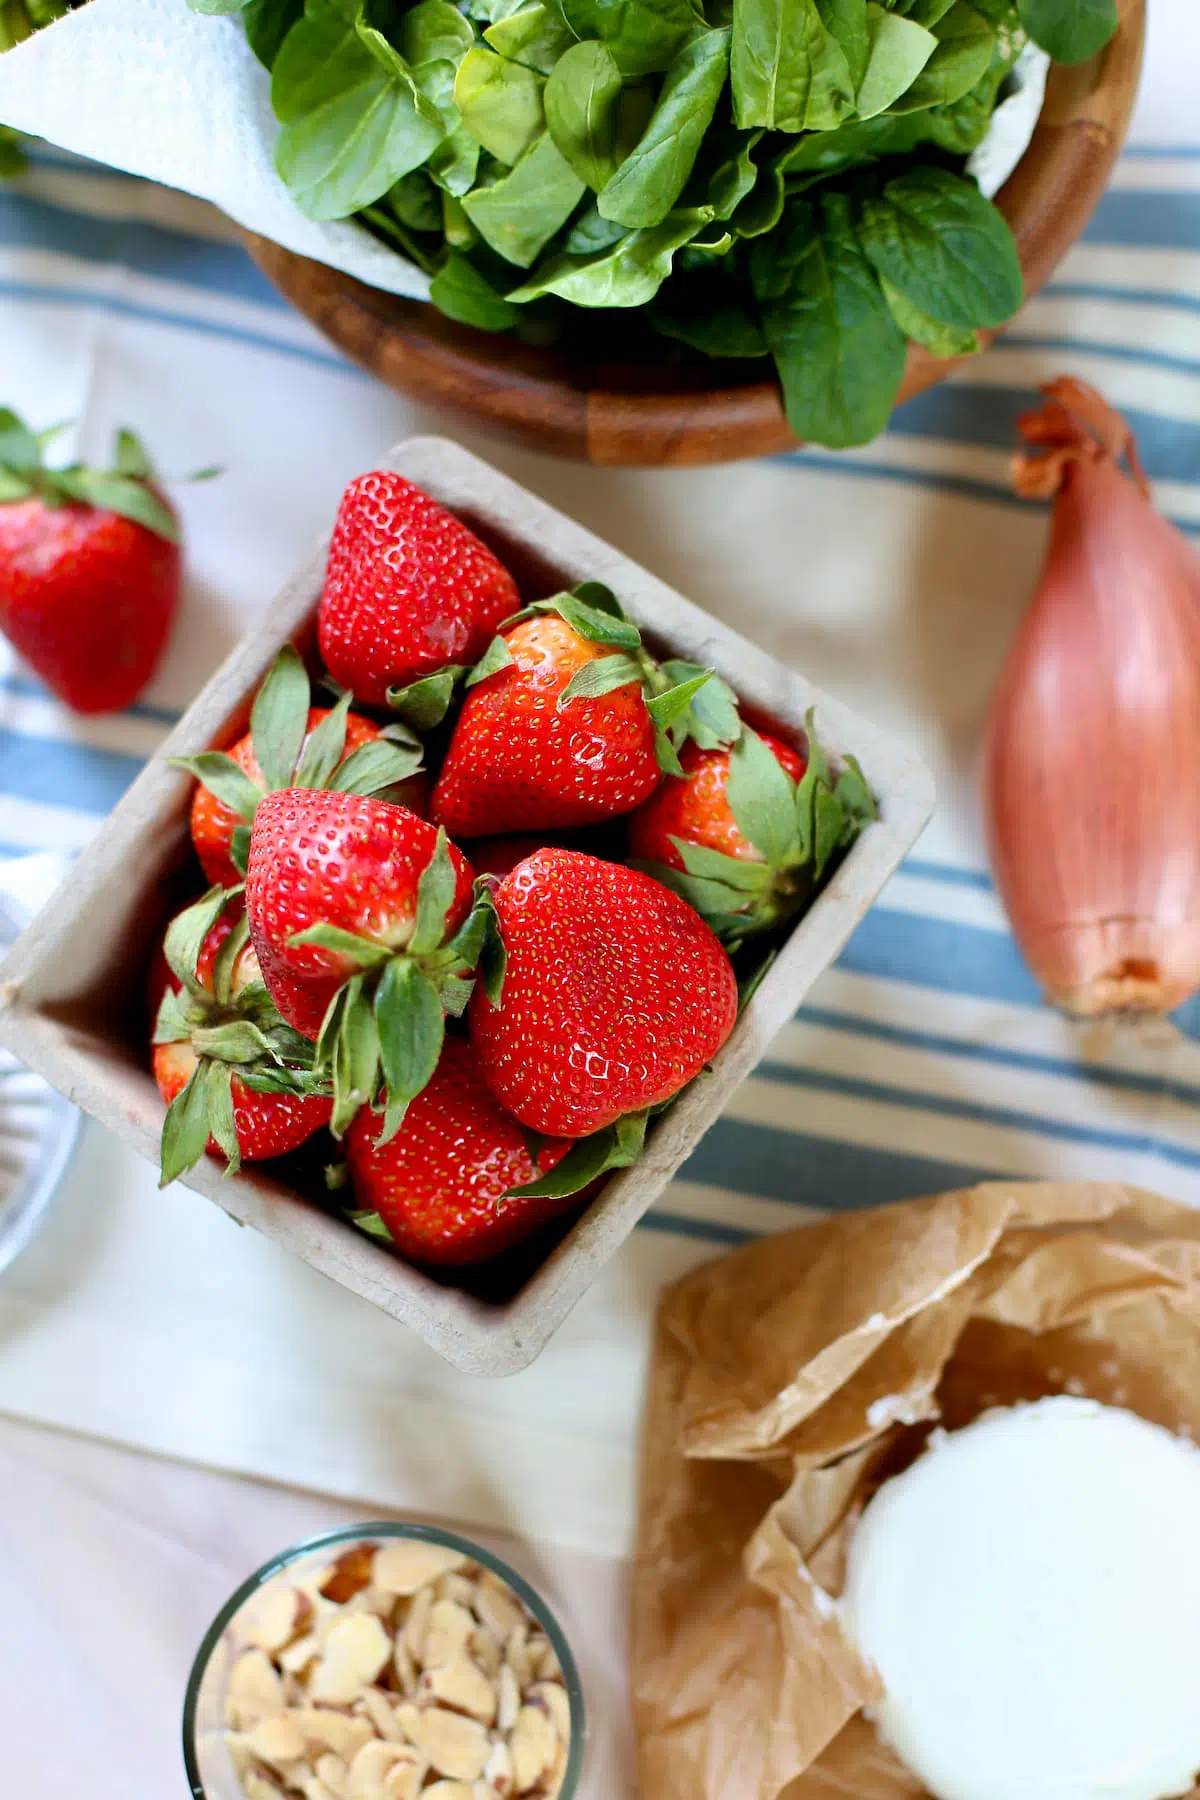 a basket of strawberries and a shallot and some spinach and other salad ingredients on a striped tablecloth.